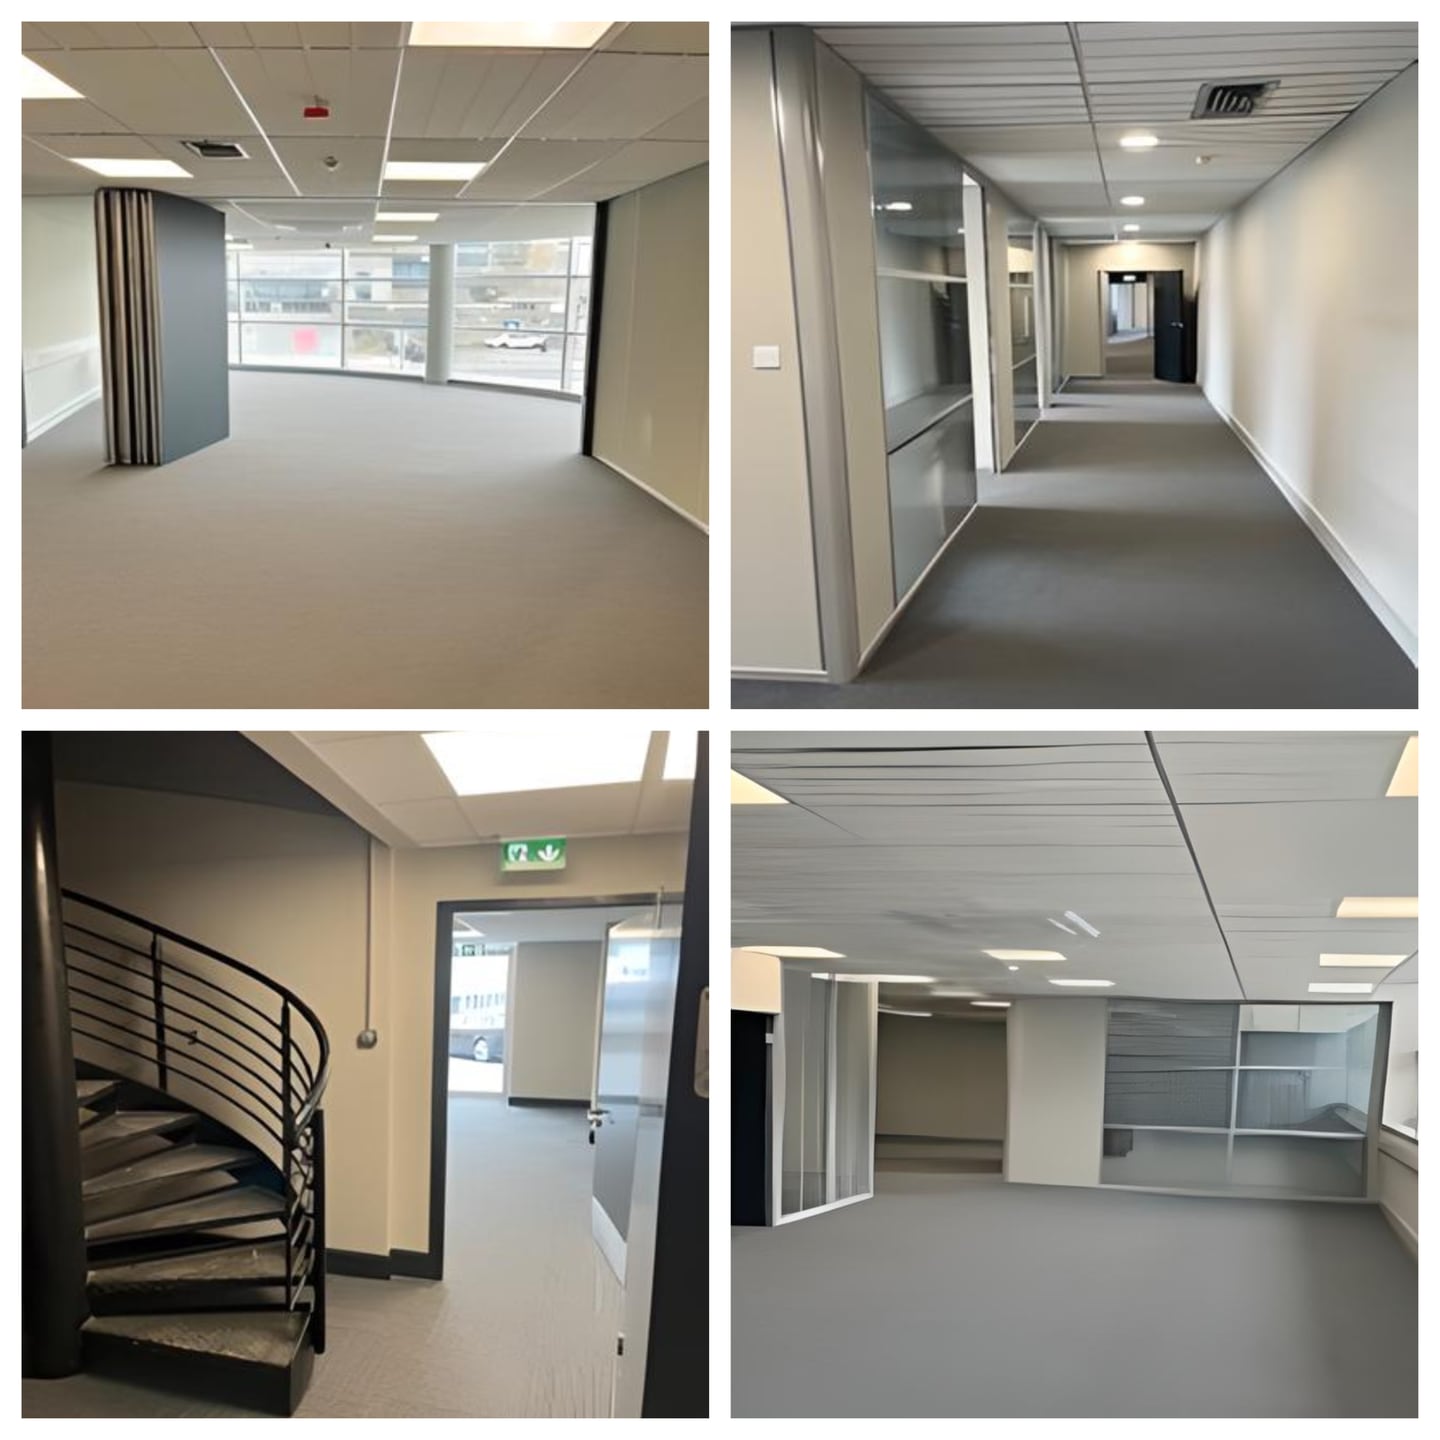 Dun Laoghaire's former ferry terminal. Work-in-progress at the former Stena Line offices on the first floor, refurbished for a co-working space. Photos Hilary Haydon